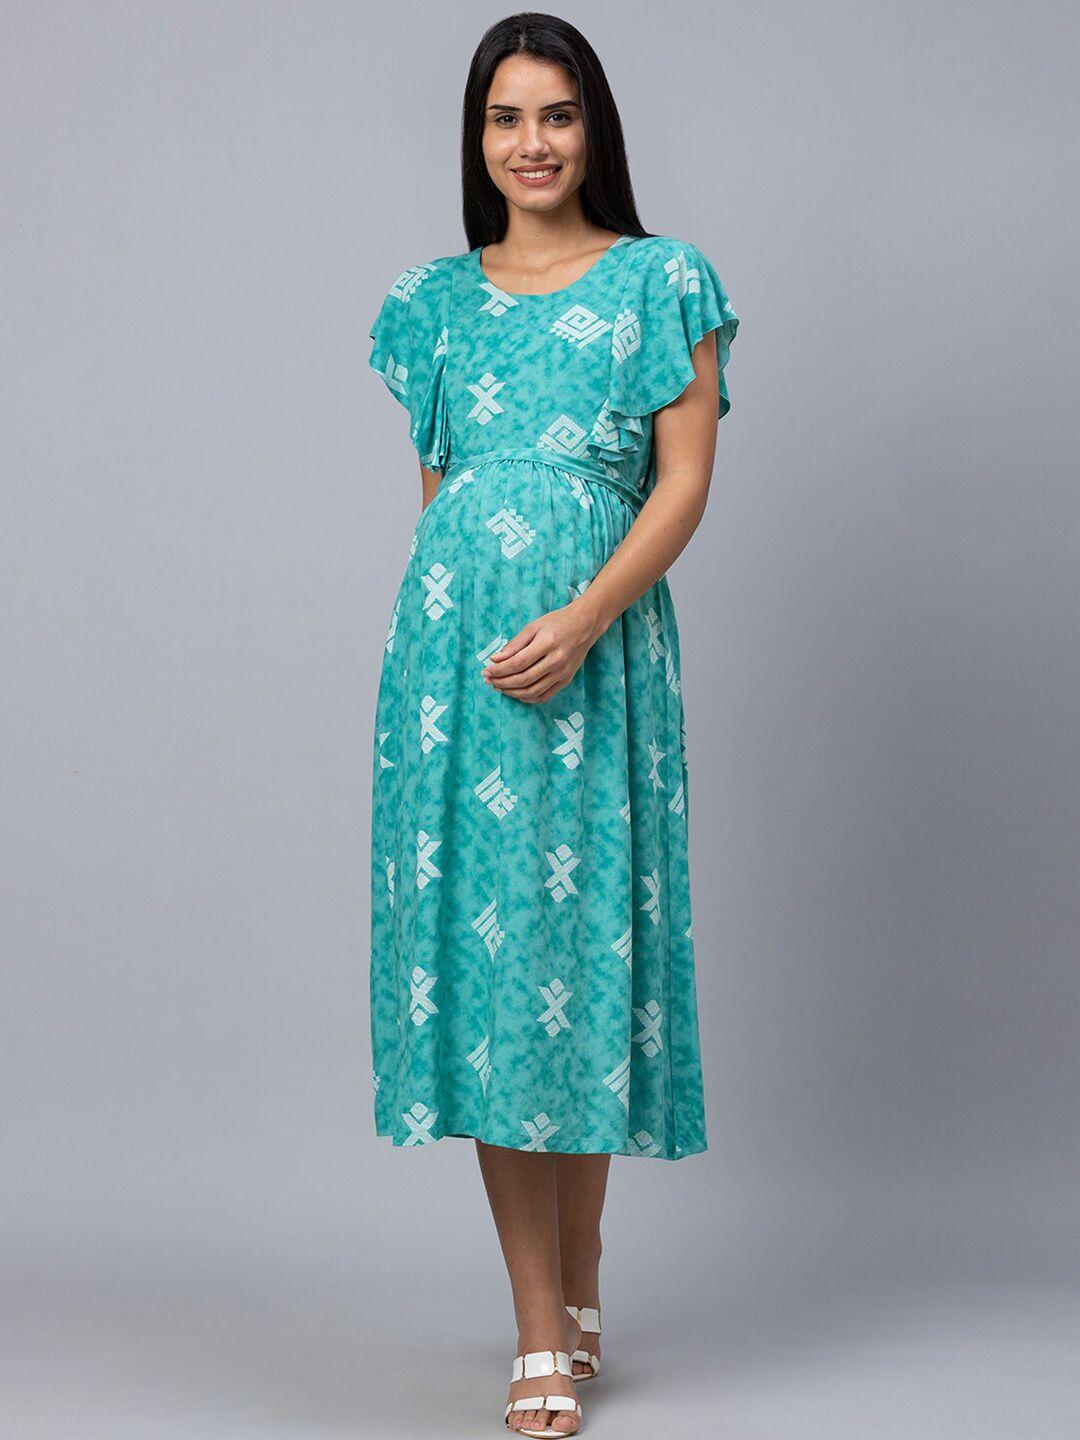 av2 turquoise blue geometric printed fit and flare maternity dress